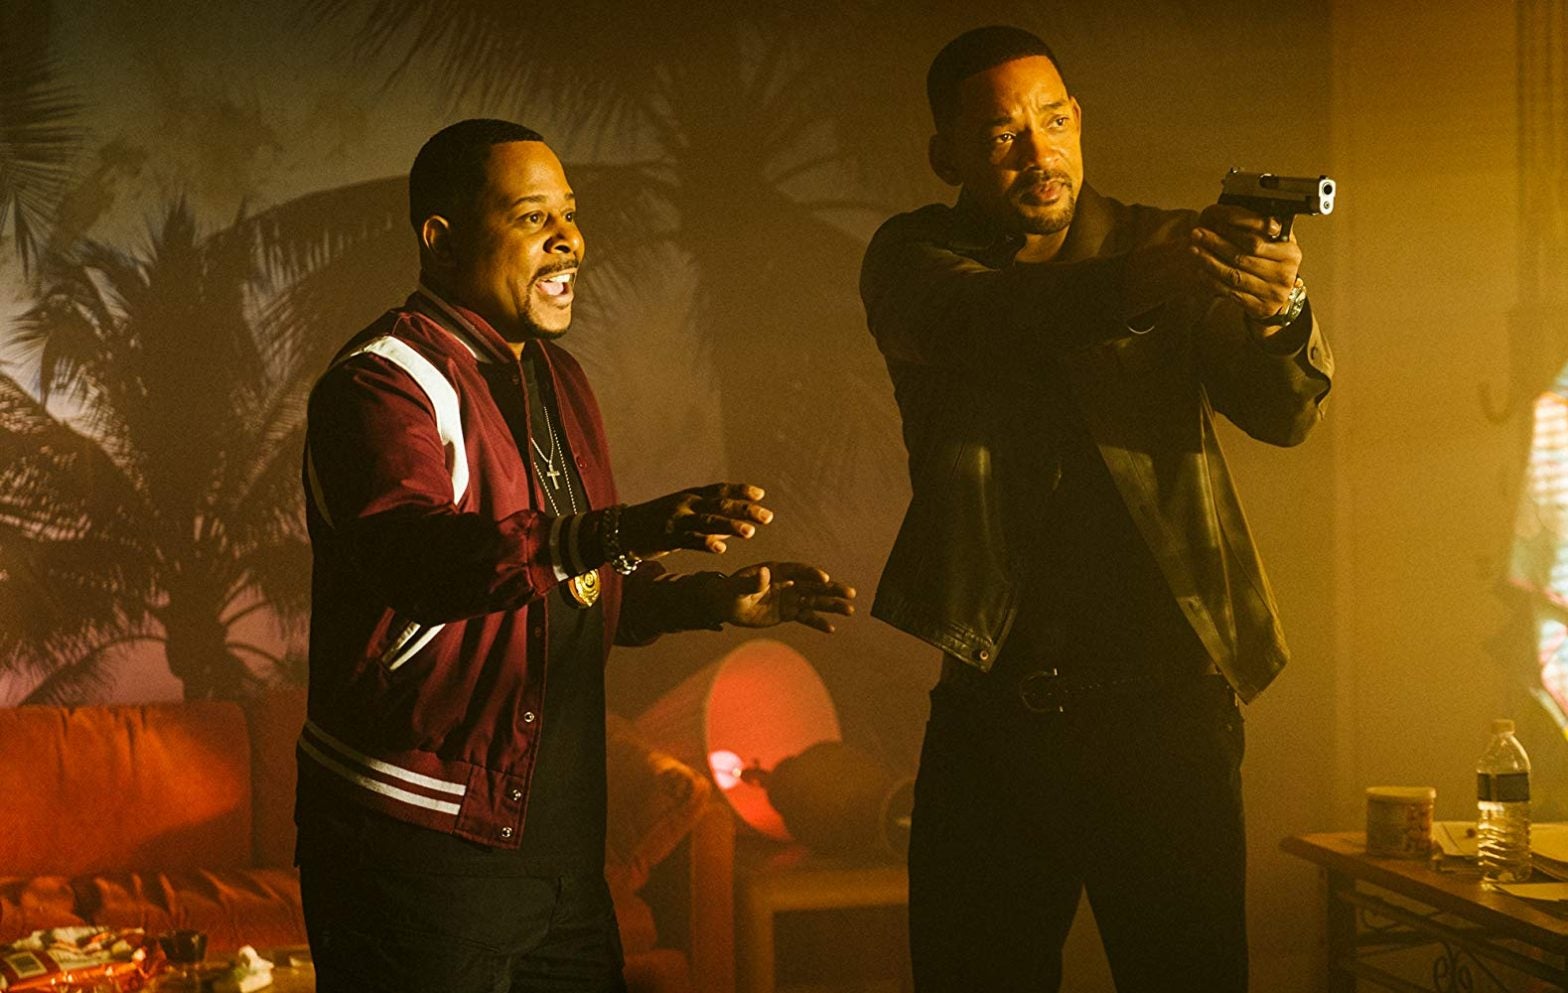 'Bad Boys 4' On The Way After 'Bad Boys For Life' Has Killer Box Office Weekend